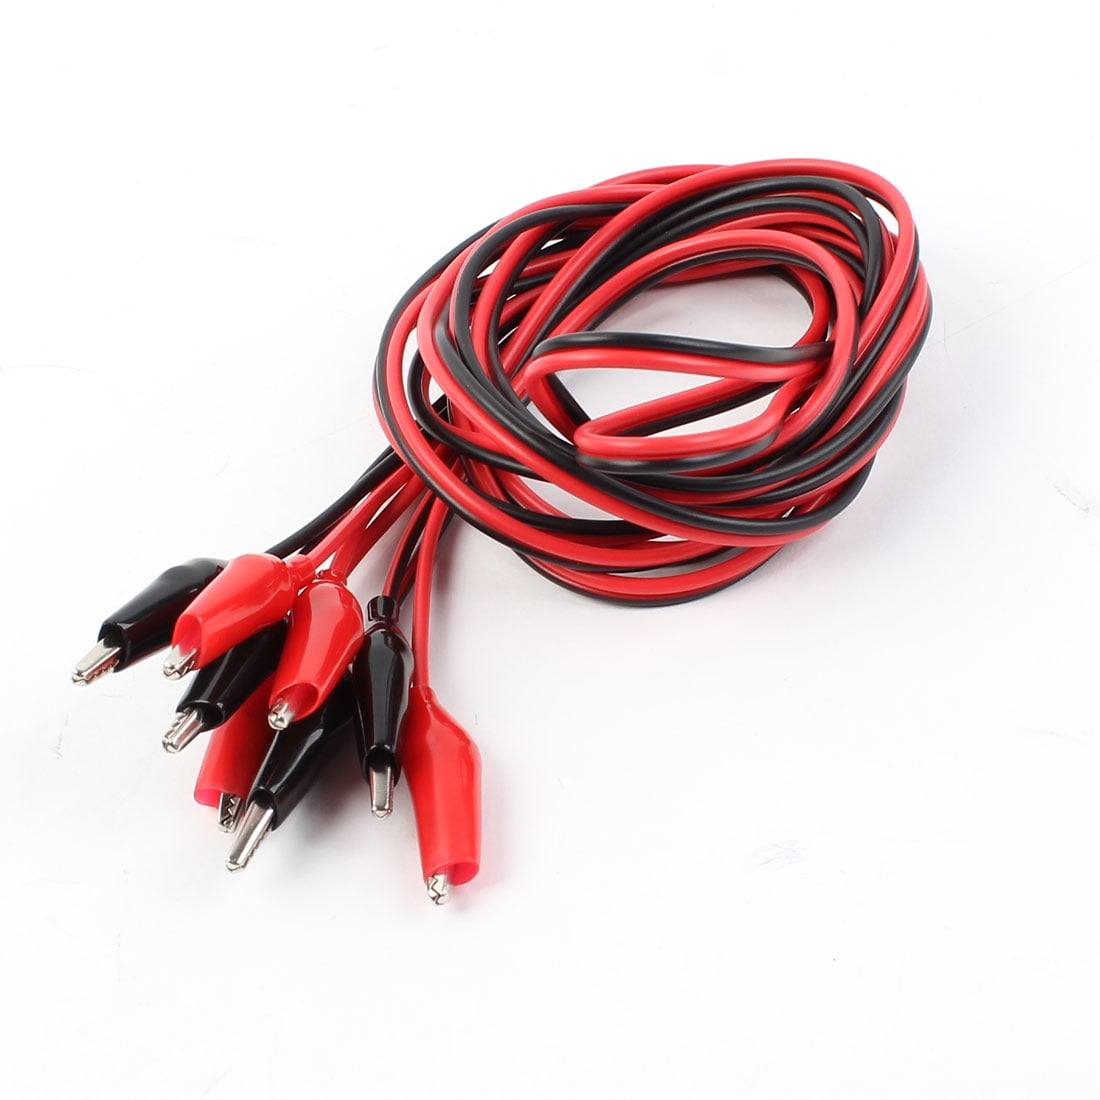 Wire Leads Black/Red Plastic Handle Test Probe Electrical Jumper Alligator Clip 